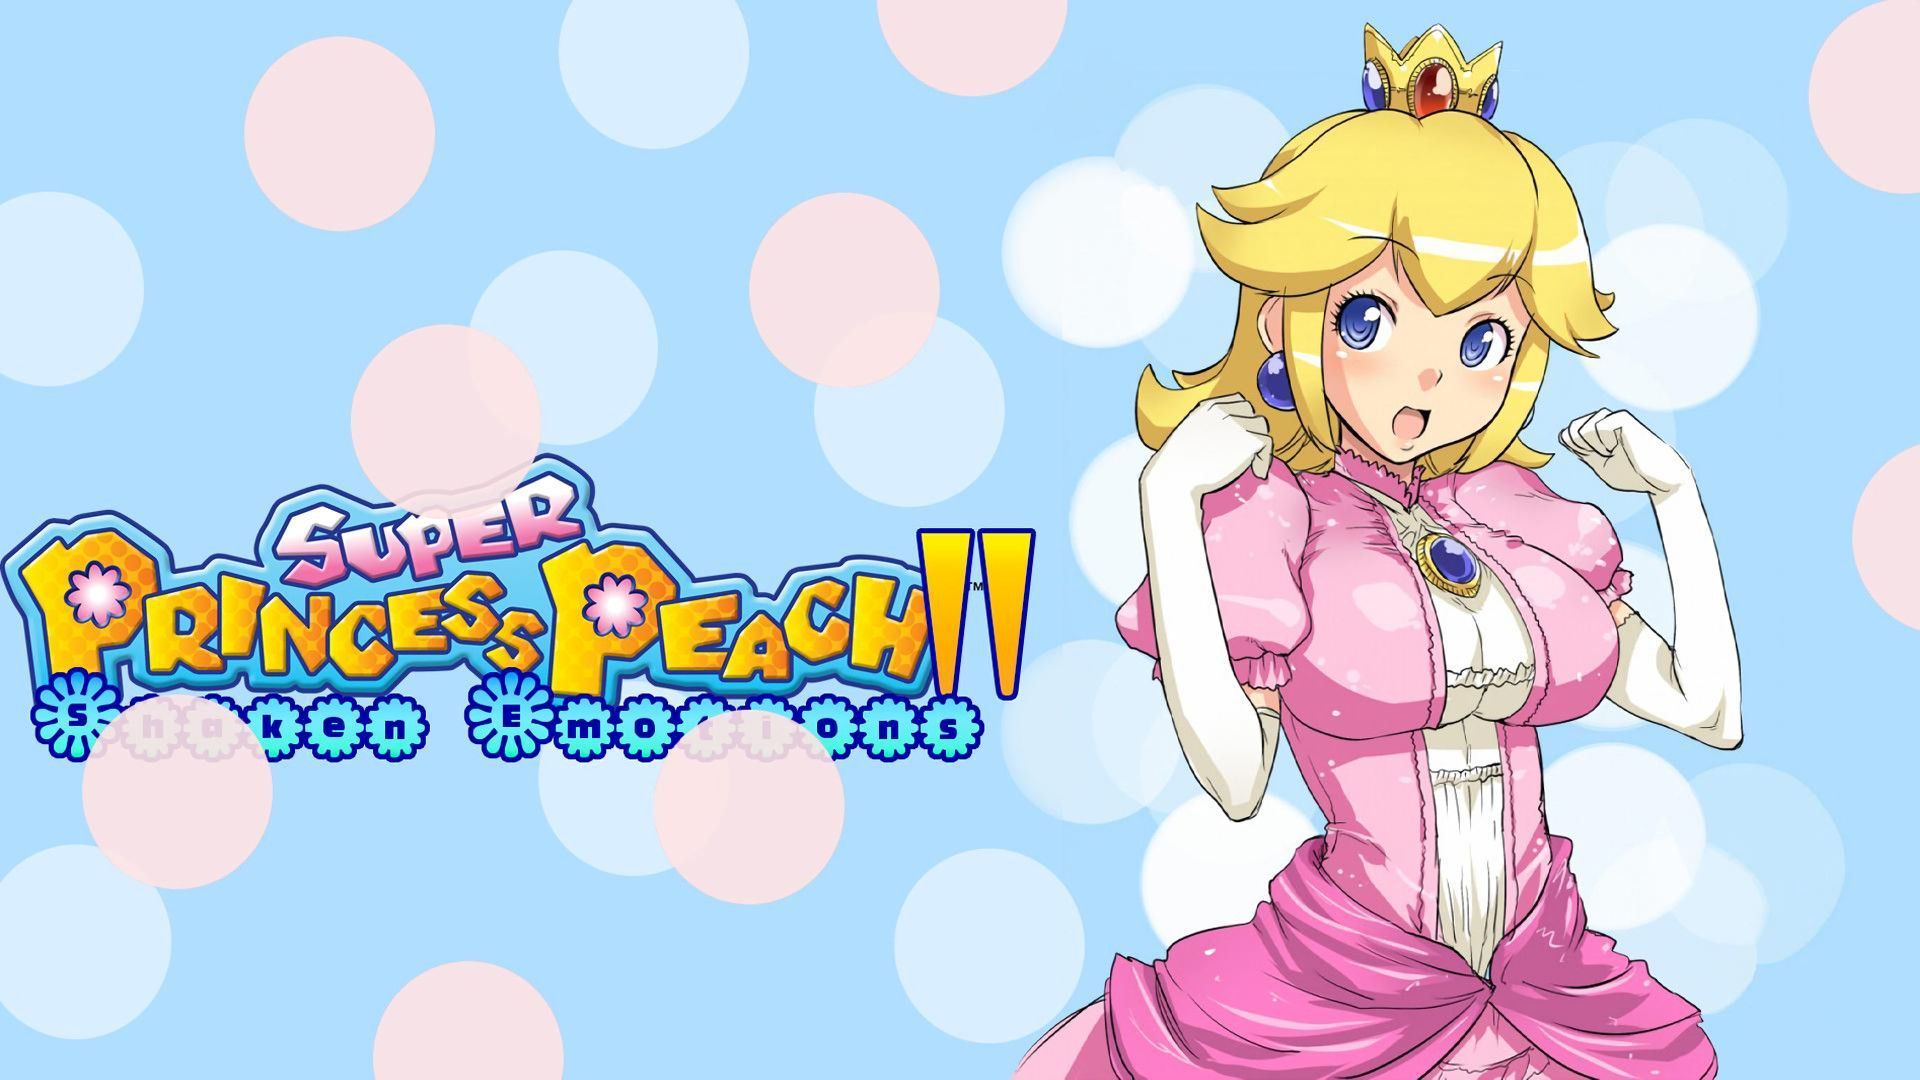 Super Princess Peach is a platformer developed and published by Nintendo for the Wii, Wii U, and 3DS. - Princess Peach